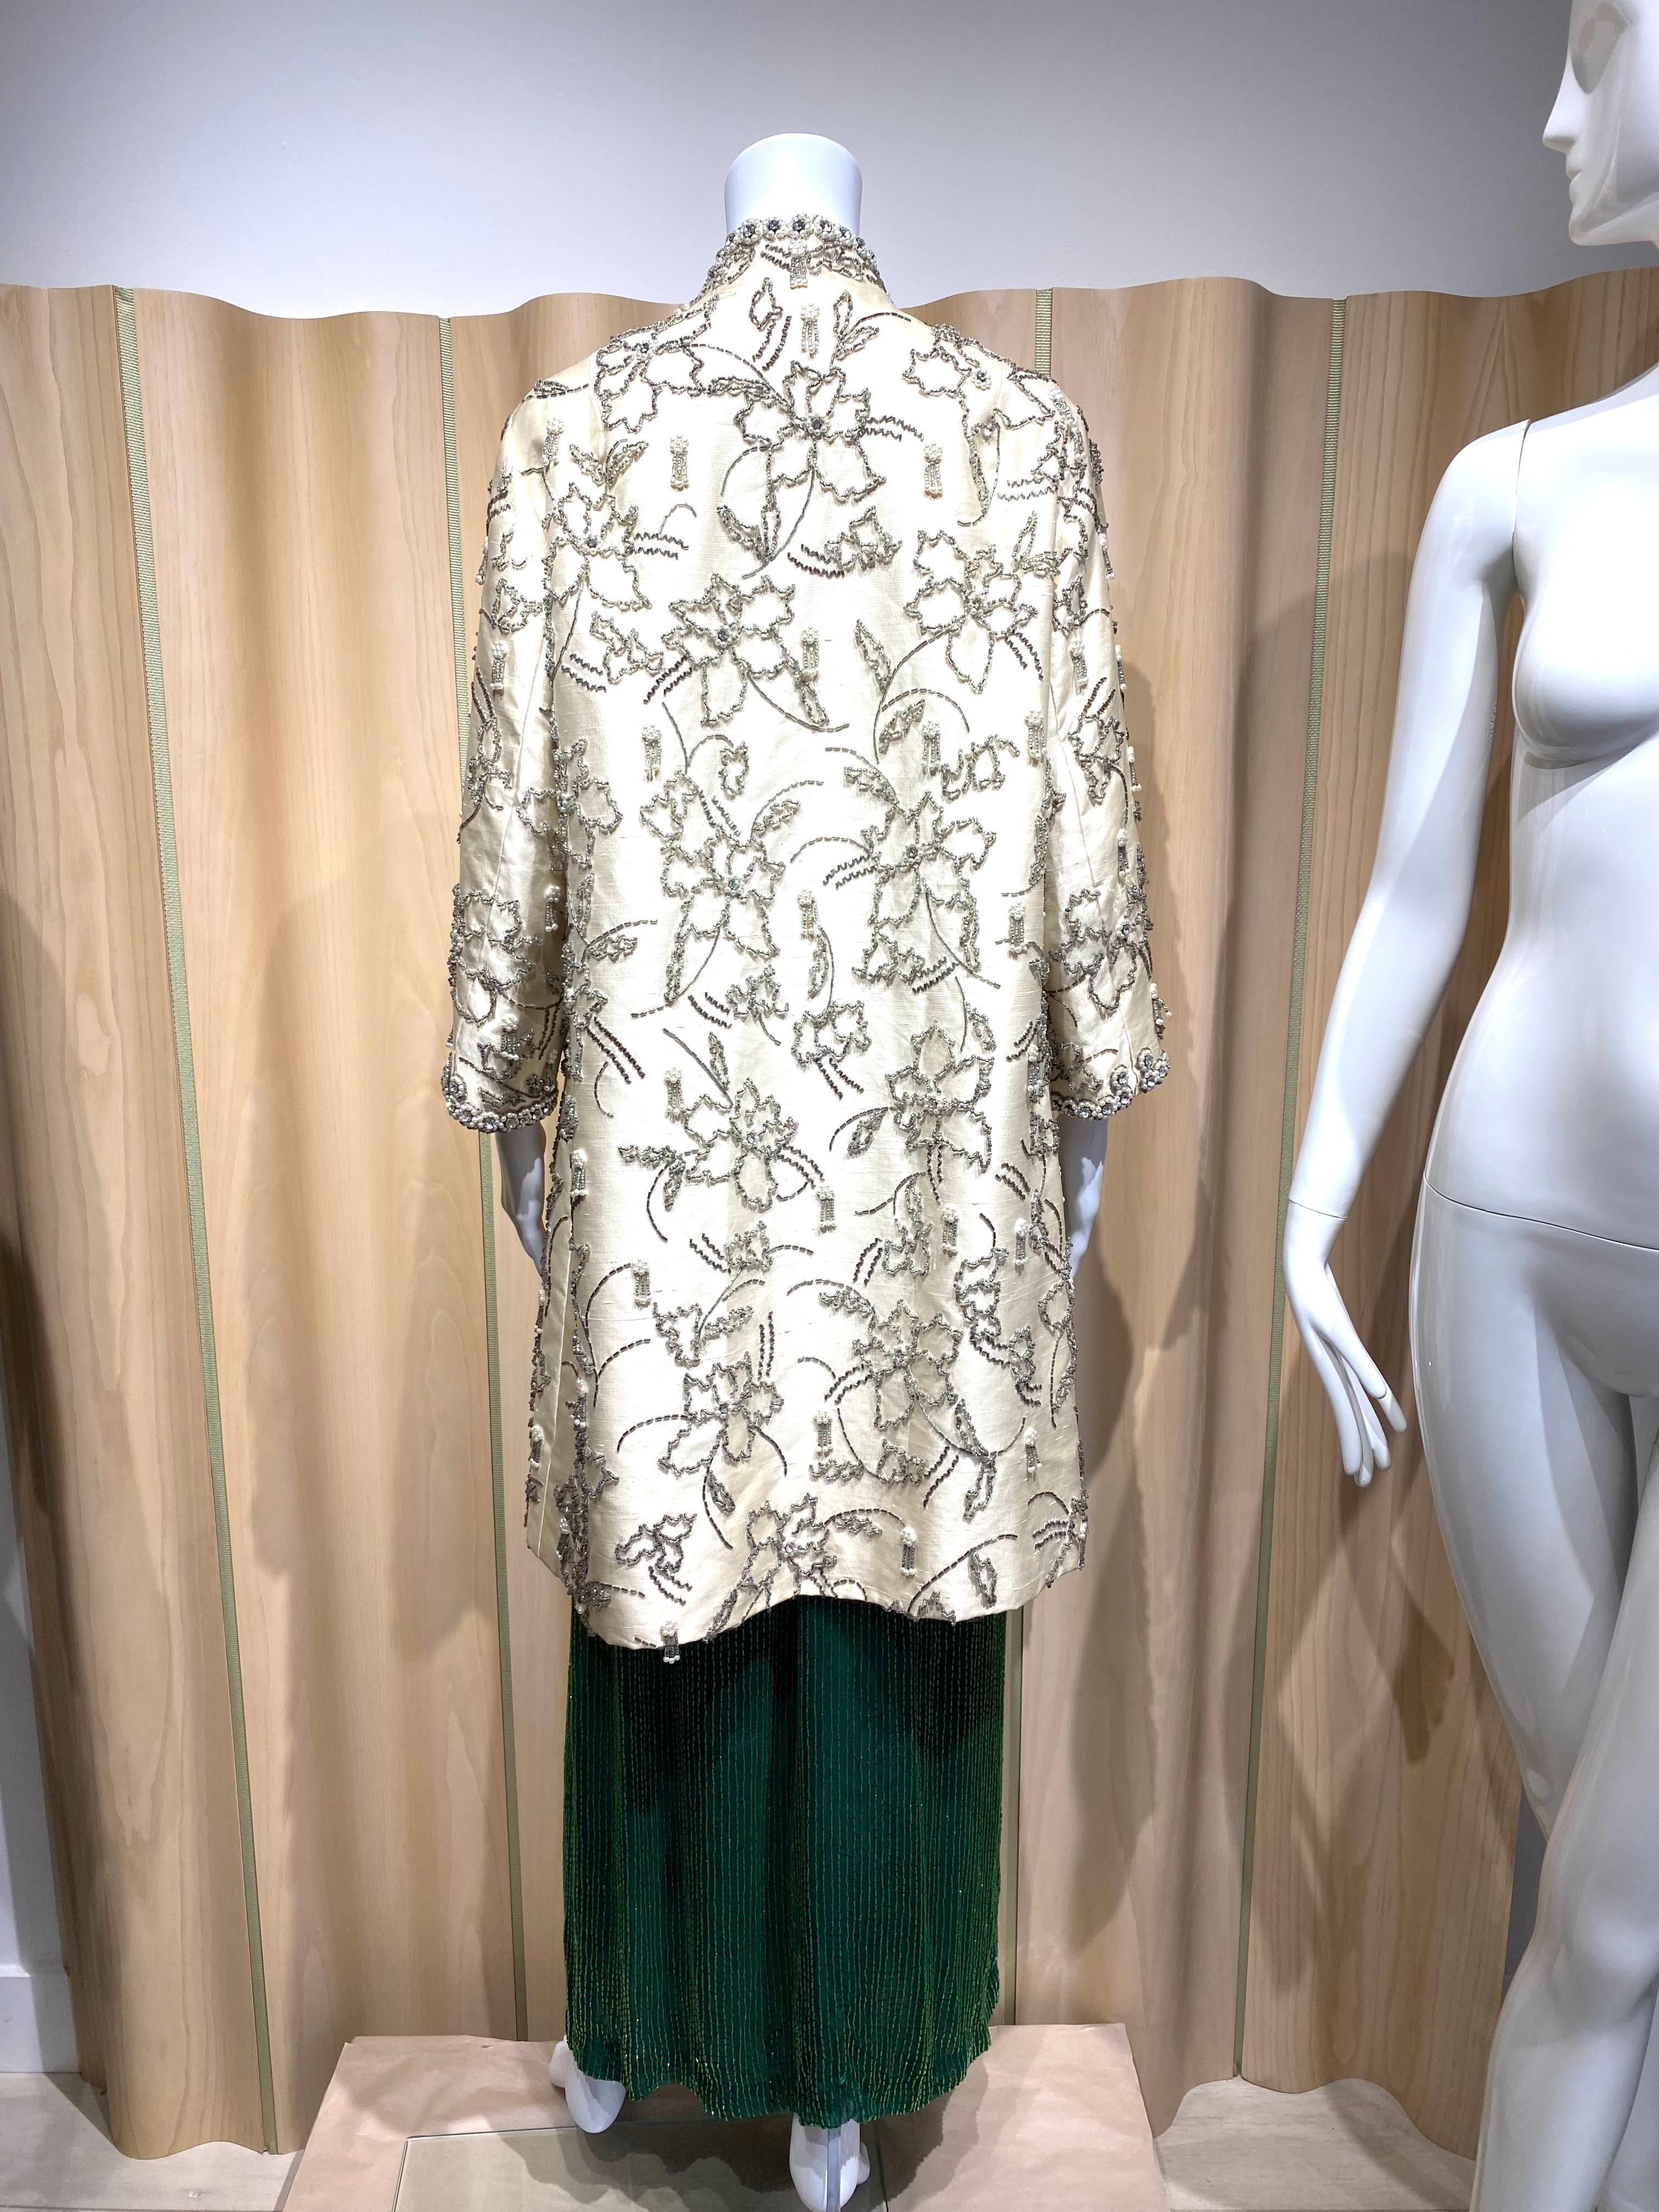 1960s Cream silk evening coat embellished in pearls and rhinestones. Perfect coat for wedding rehearsal or cocktail party.
Fabric : Silk
Size Large
Measurement:
